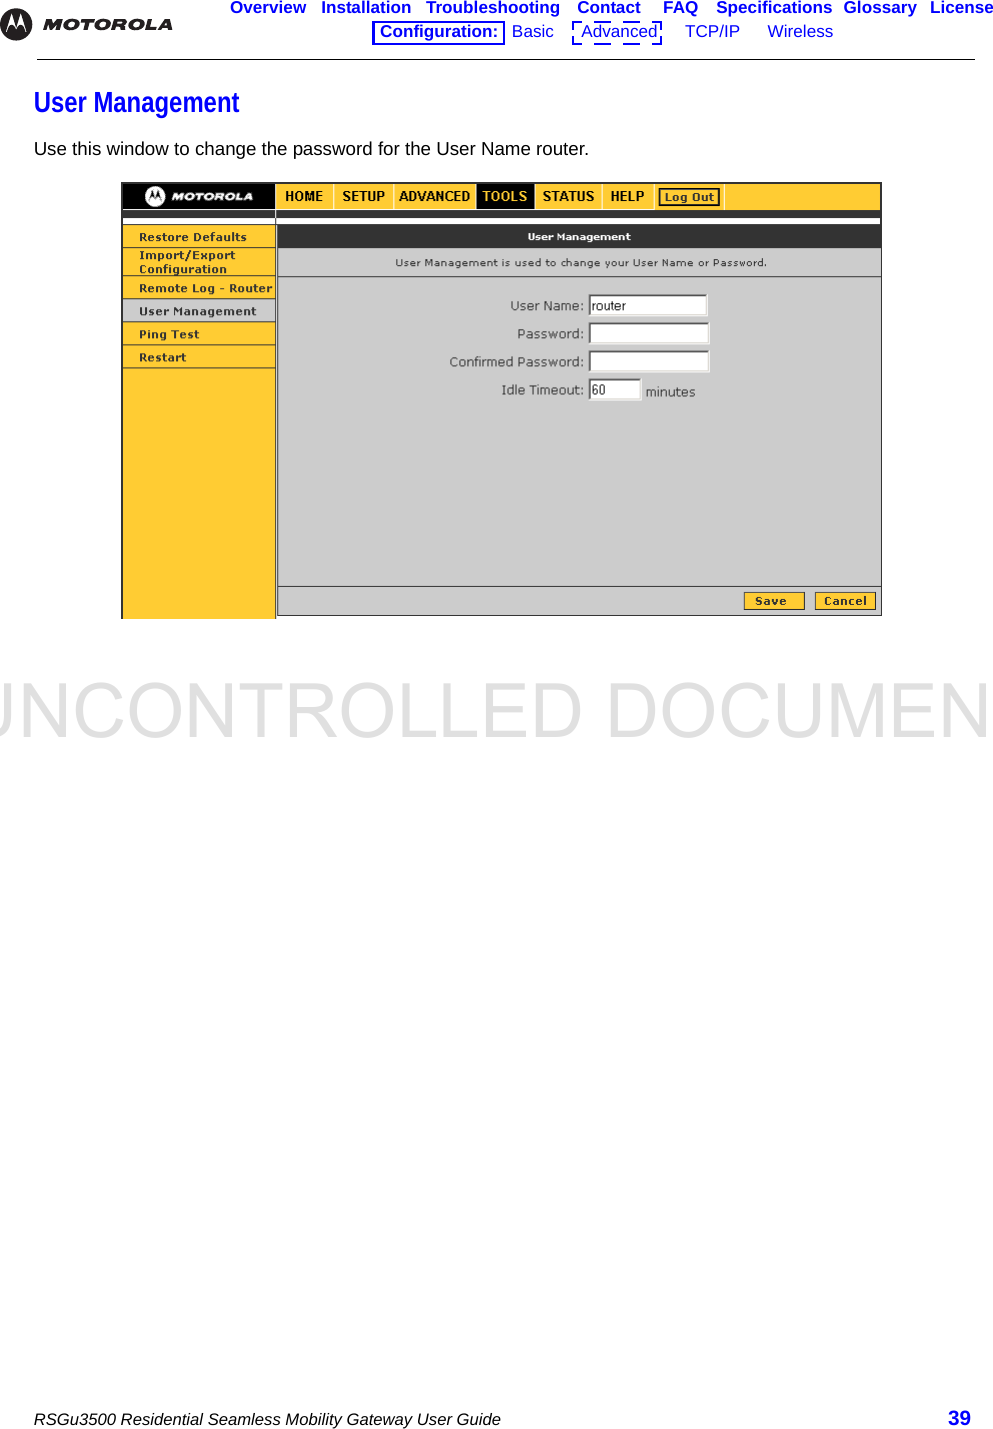 UNCONTROLLED DOCUMENTRSGu3500 Residential Seamless Mobility Gateway User Guide 39Overview Installation Troubleshooting Contact FAQ Specifications Glossary LicenseConfiguration:   Basic      Advanced      TCP/IP      Wireless    User ManagementUse this window to change the password for the User Name router.